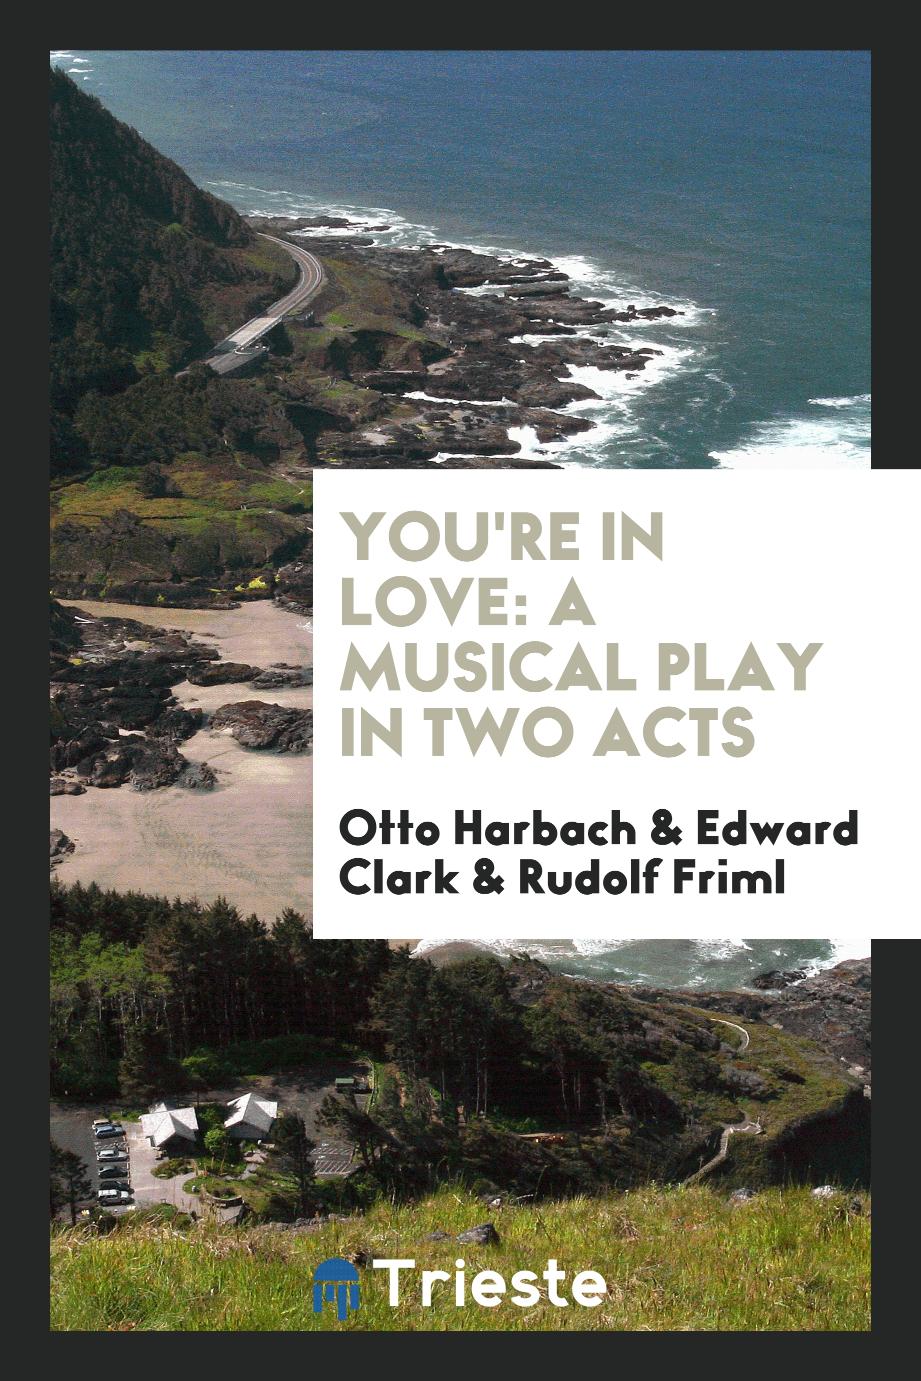 Otto Harbach, Edward Clark, Rudolf Friml - You're in love: a musical play in two acts